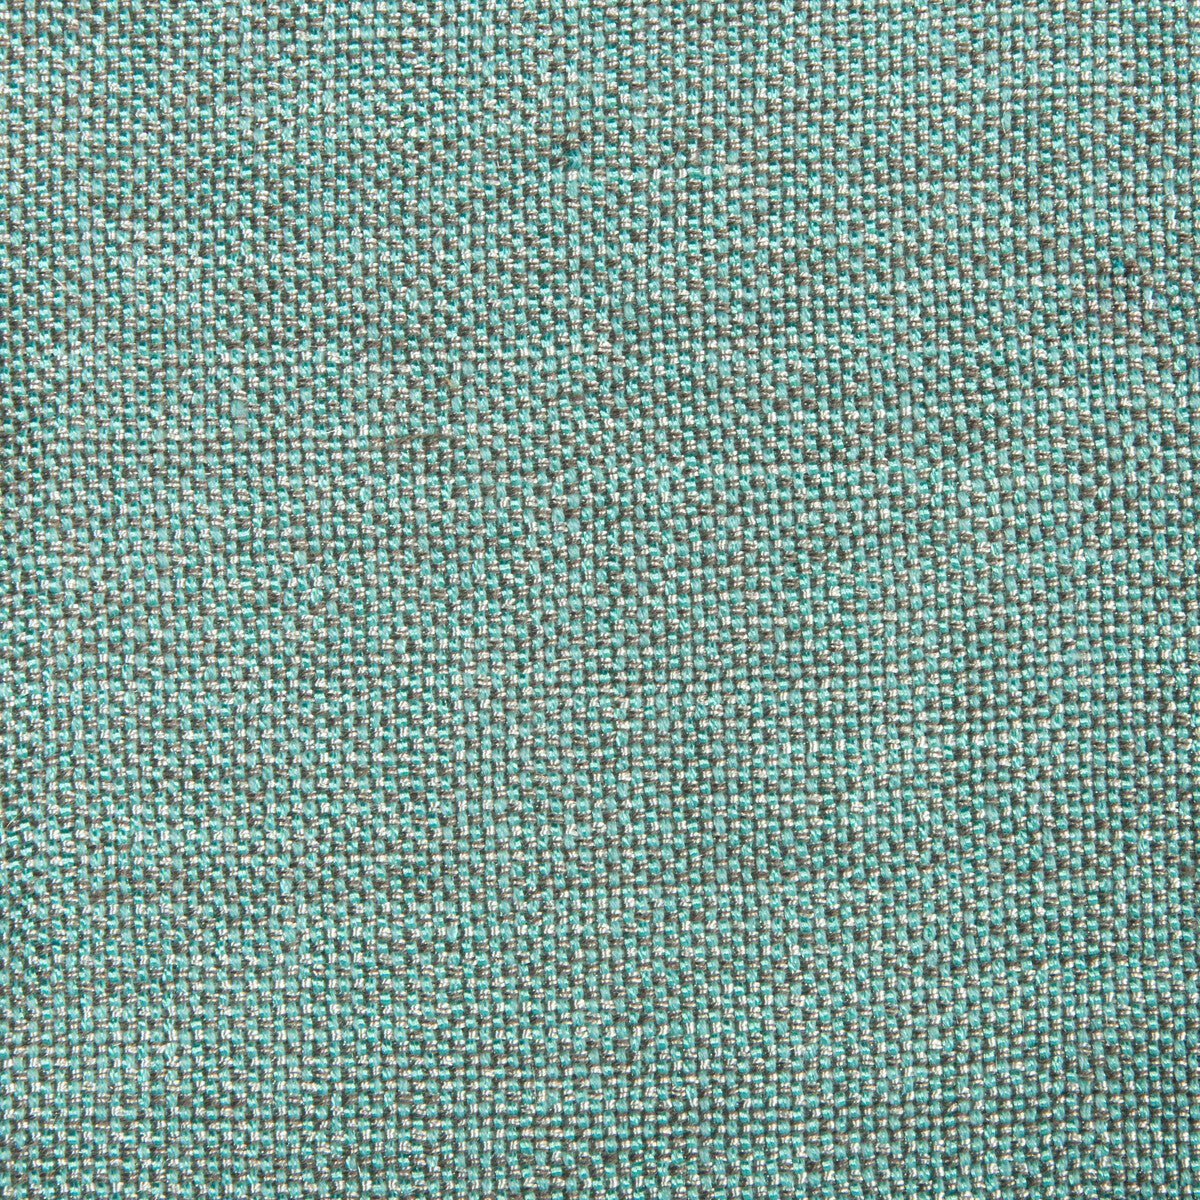 Kravet Contract fabric in 34926-1311 color - pattern 34926.1311.0 - by Kravet Contract